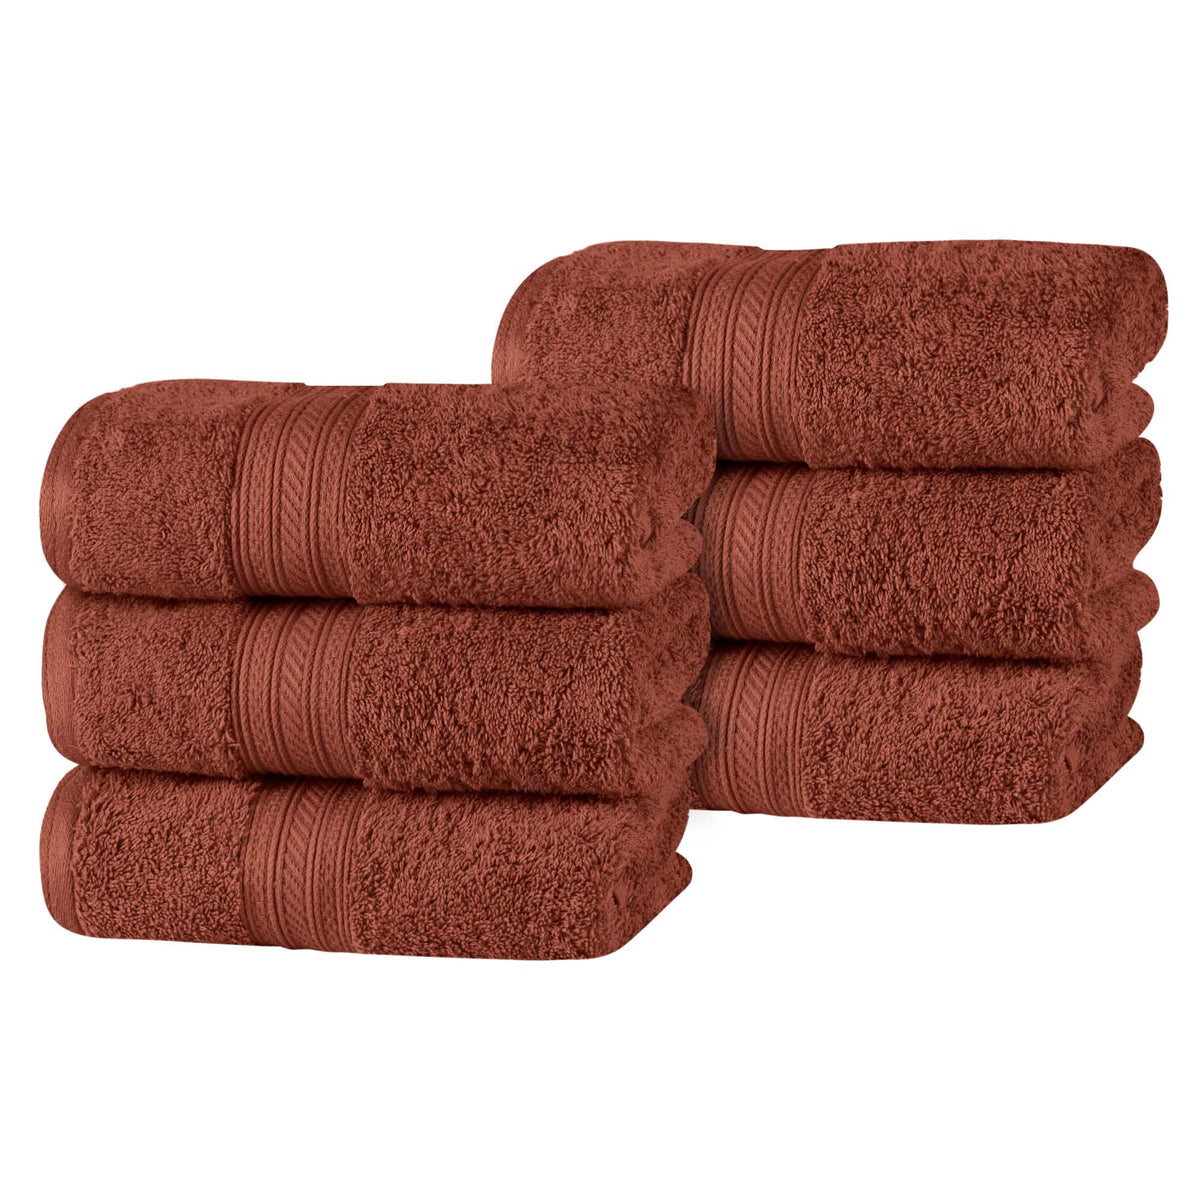 Atlas Combed Cotton Highly Absorbent Solid Hand Towels Set of 6 - Hot Chocolate